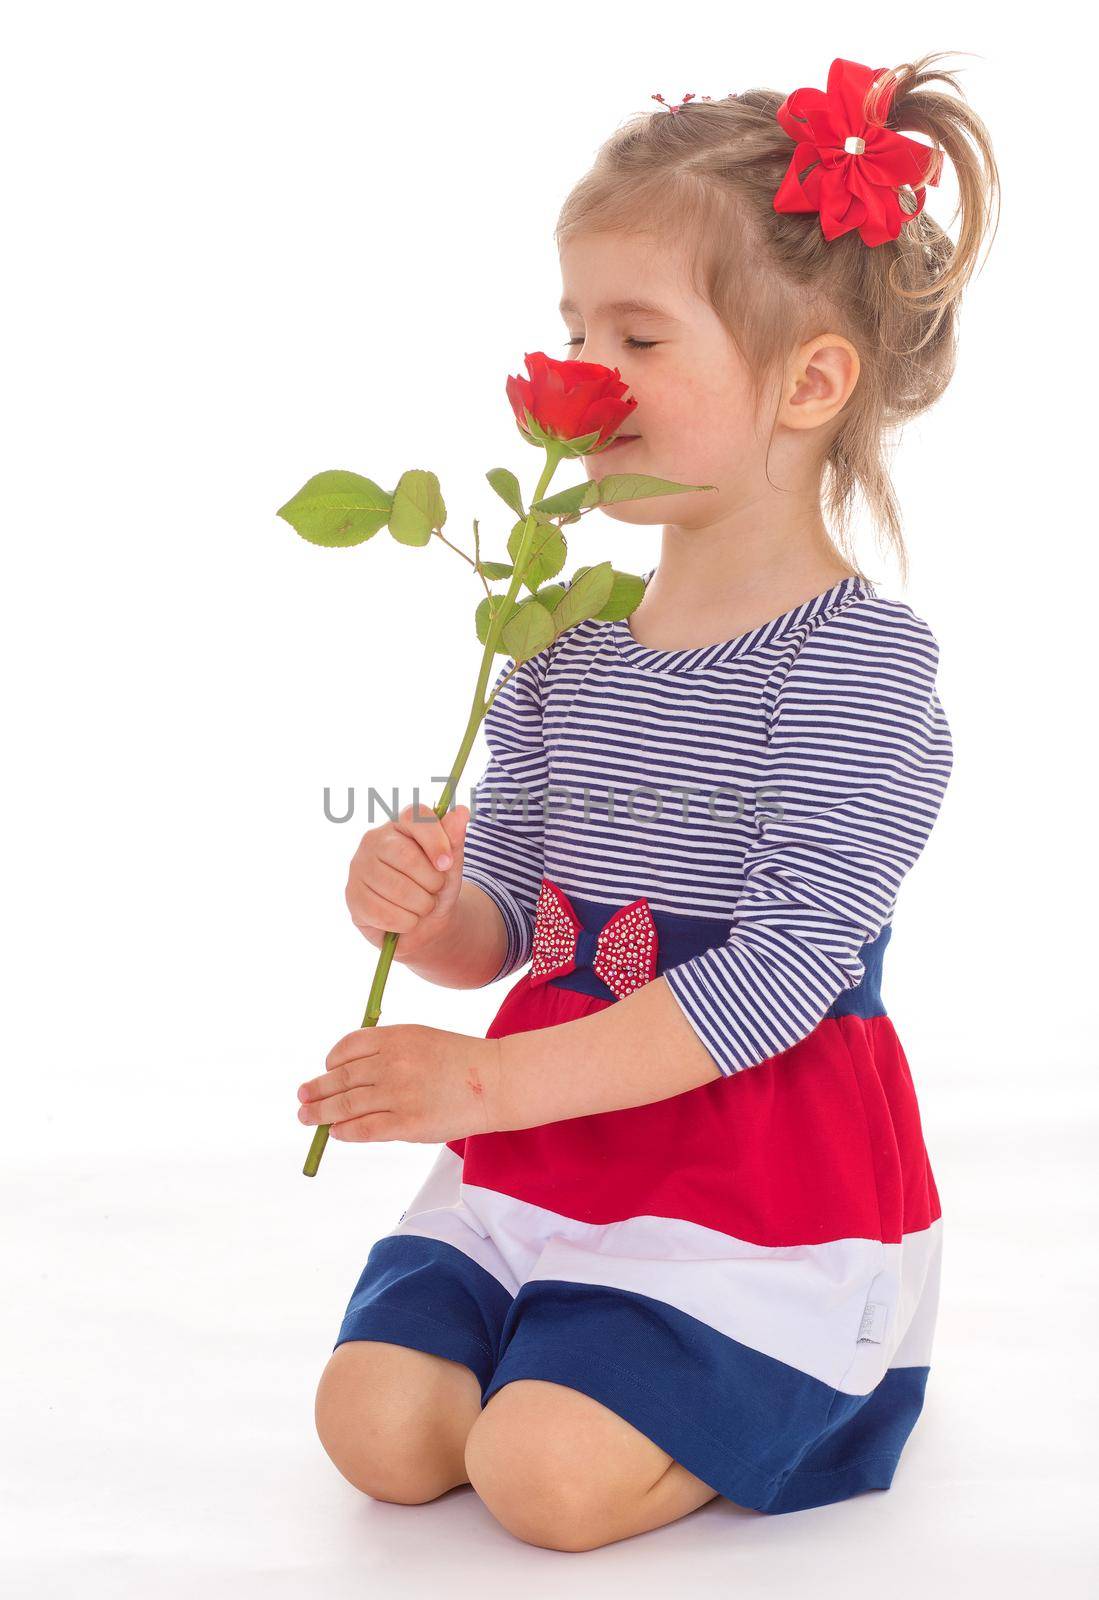 Fashionable little girl with a rose. by kolesnikov_studio